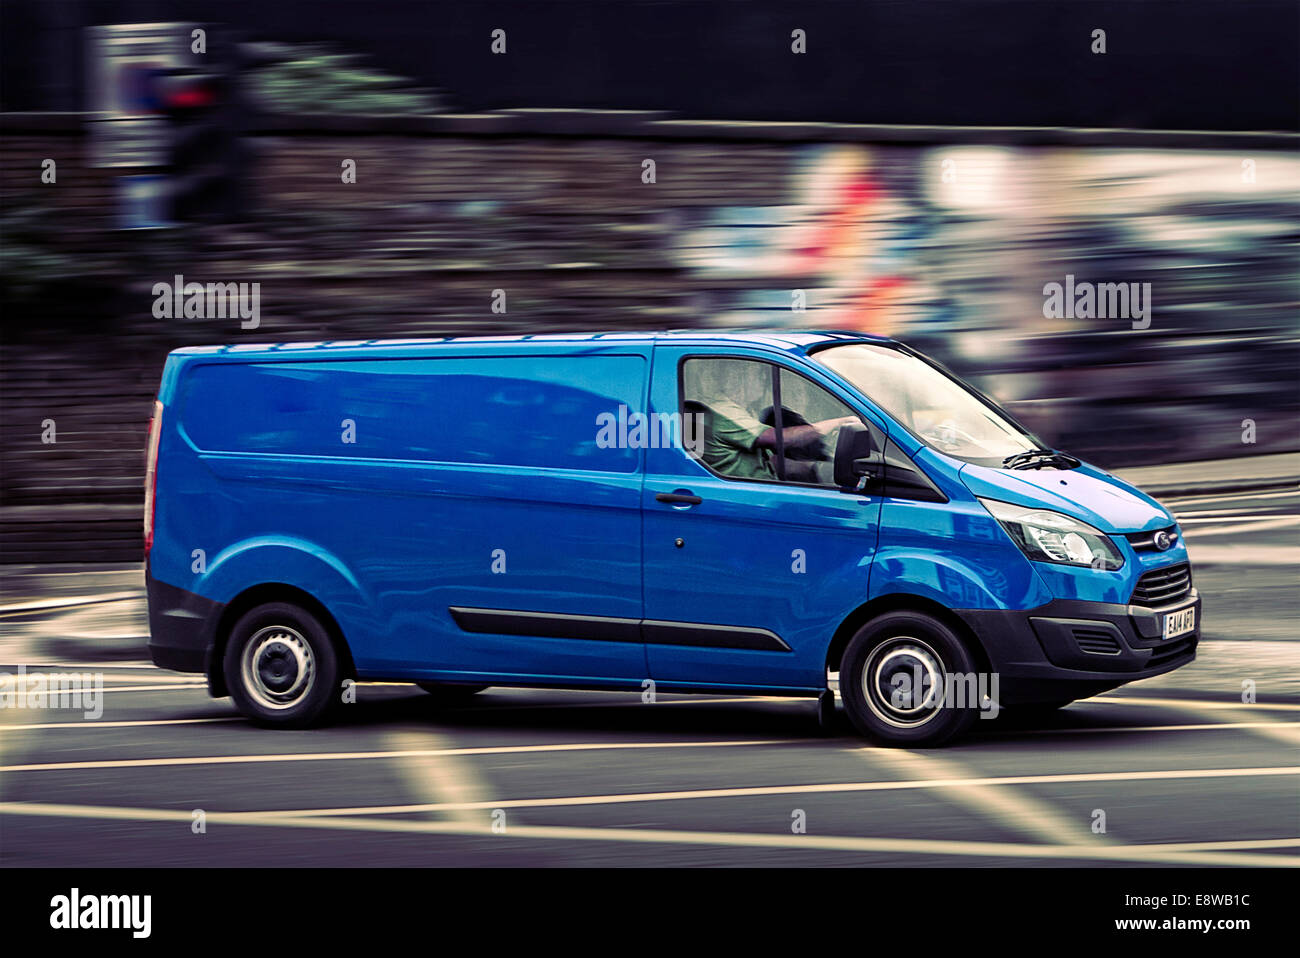 2014 Ford Transit Van driving in the city Stock Photo